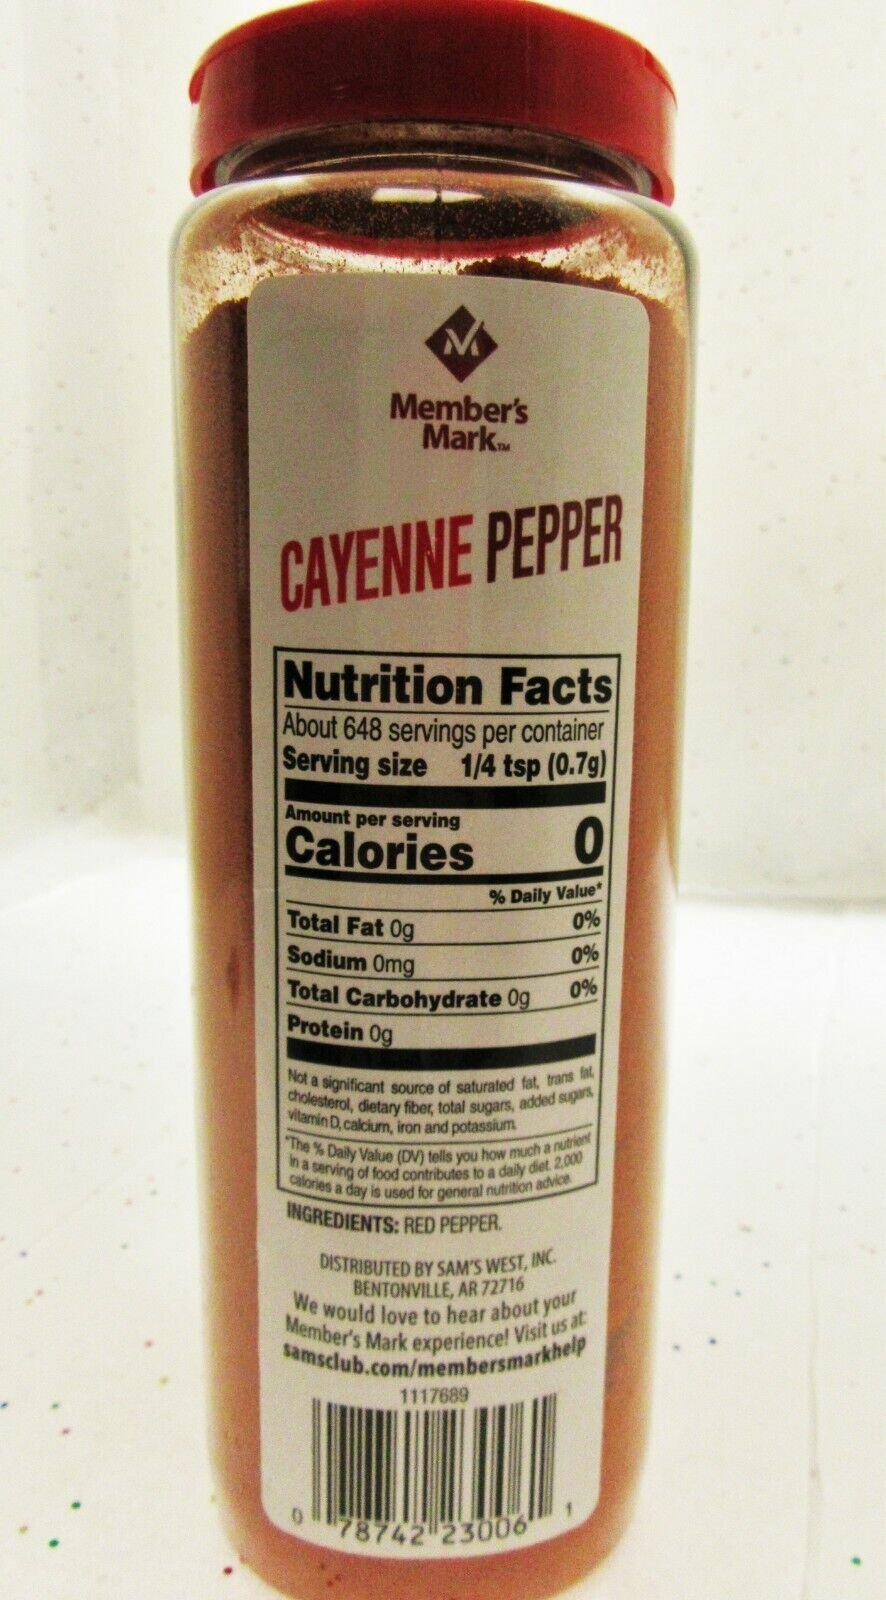 16 Ounce Cayenne Pepper Seasoning Spice Seafood Food ~ 1lb container